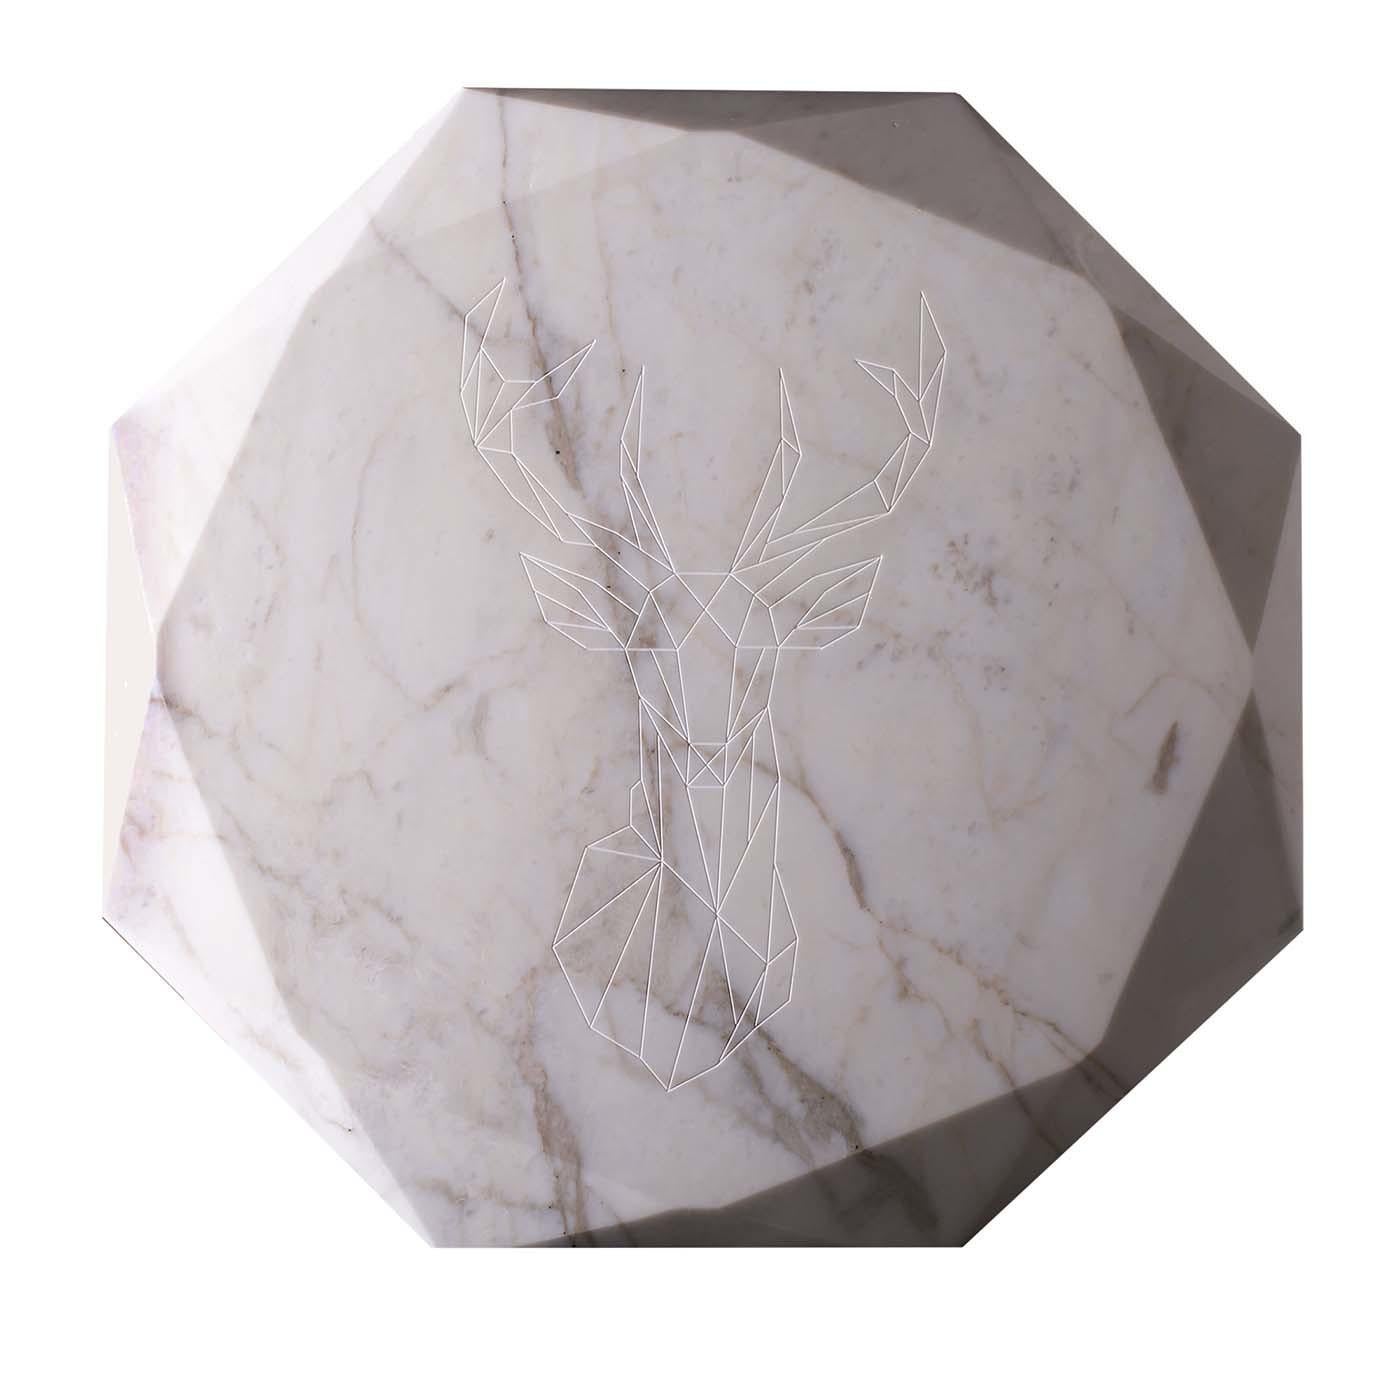 This remarkable tabletop shows marble in its most expressive character and an out-of-the-ordinary elegance. Featuring a sculptural form, the glossy white Calacatta marble is defined by a refined profile with a diamond cut shape and a striking